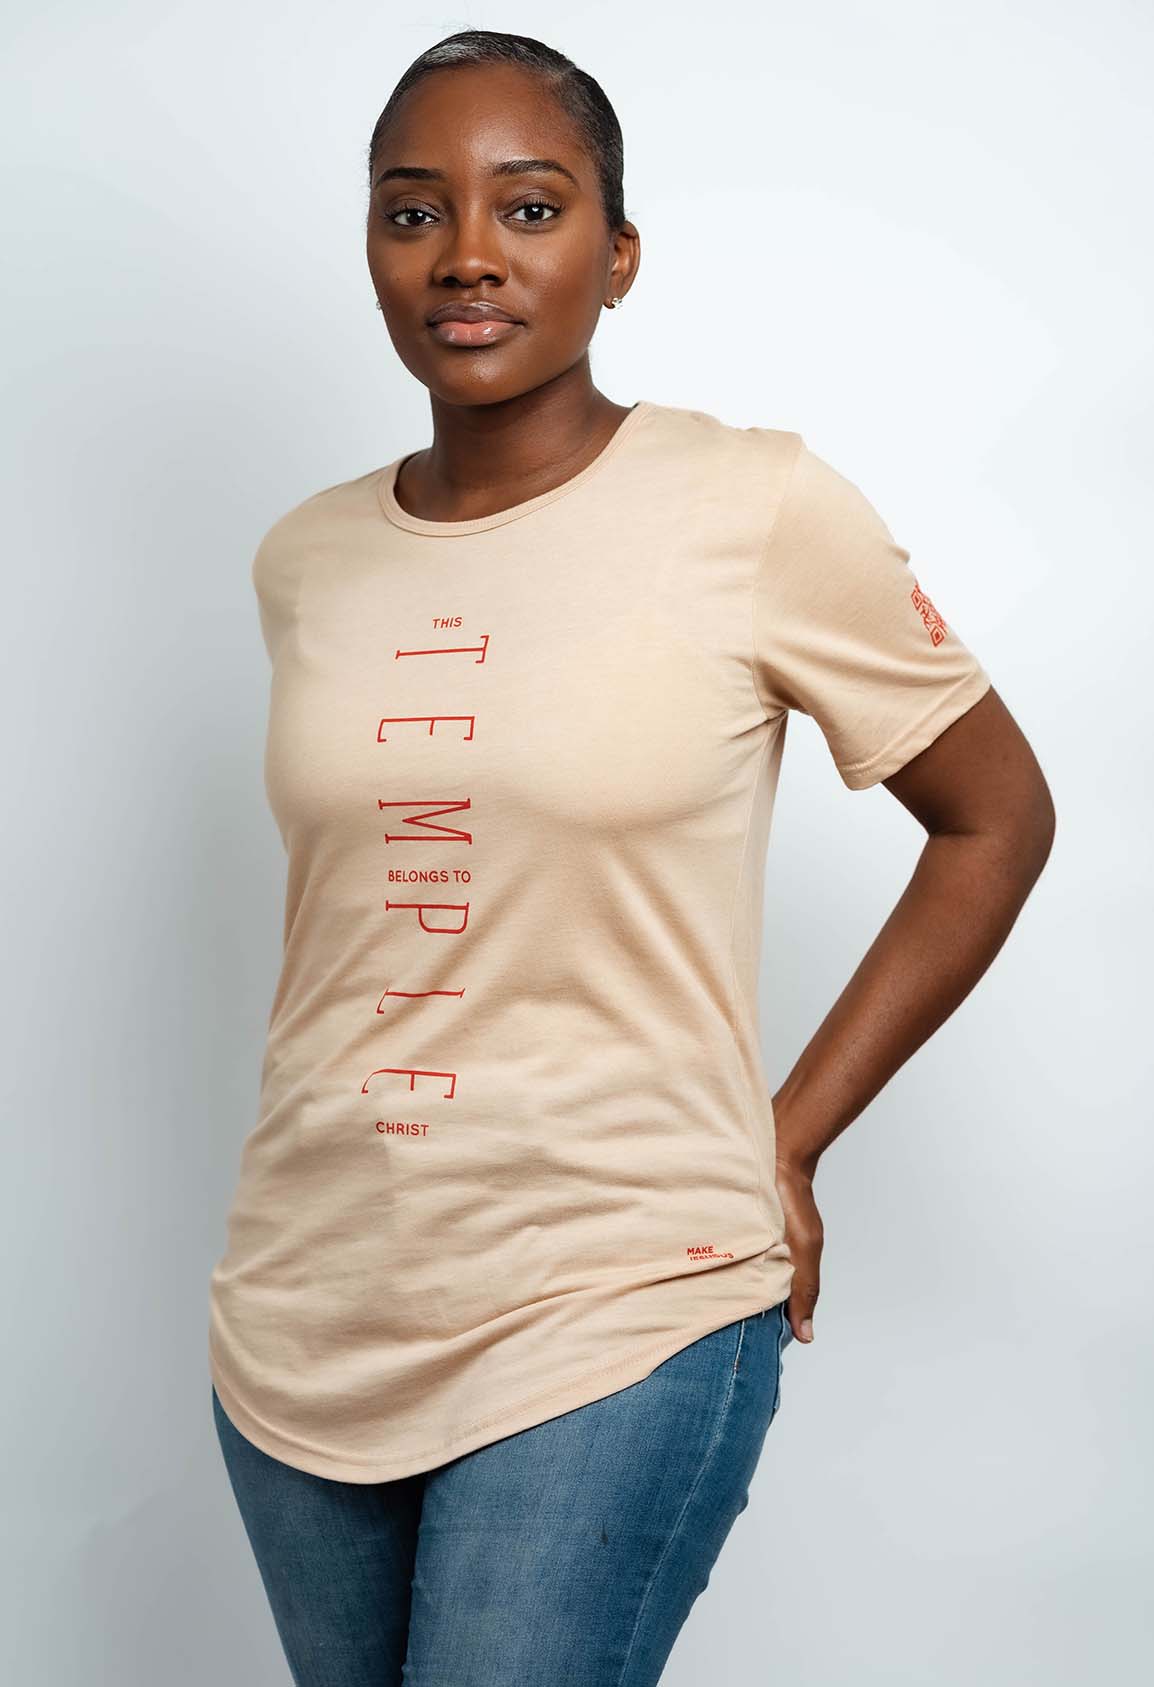 This Temple Belongs To Christ: A faith inspiring and casual/trendy curved tee for many occasions.